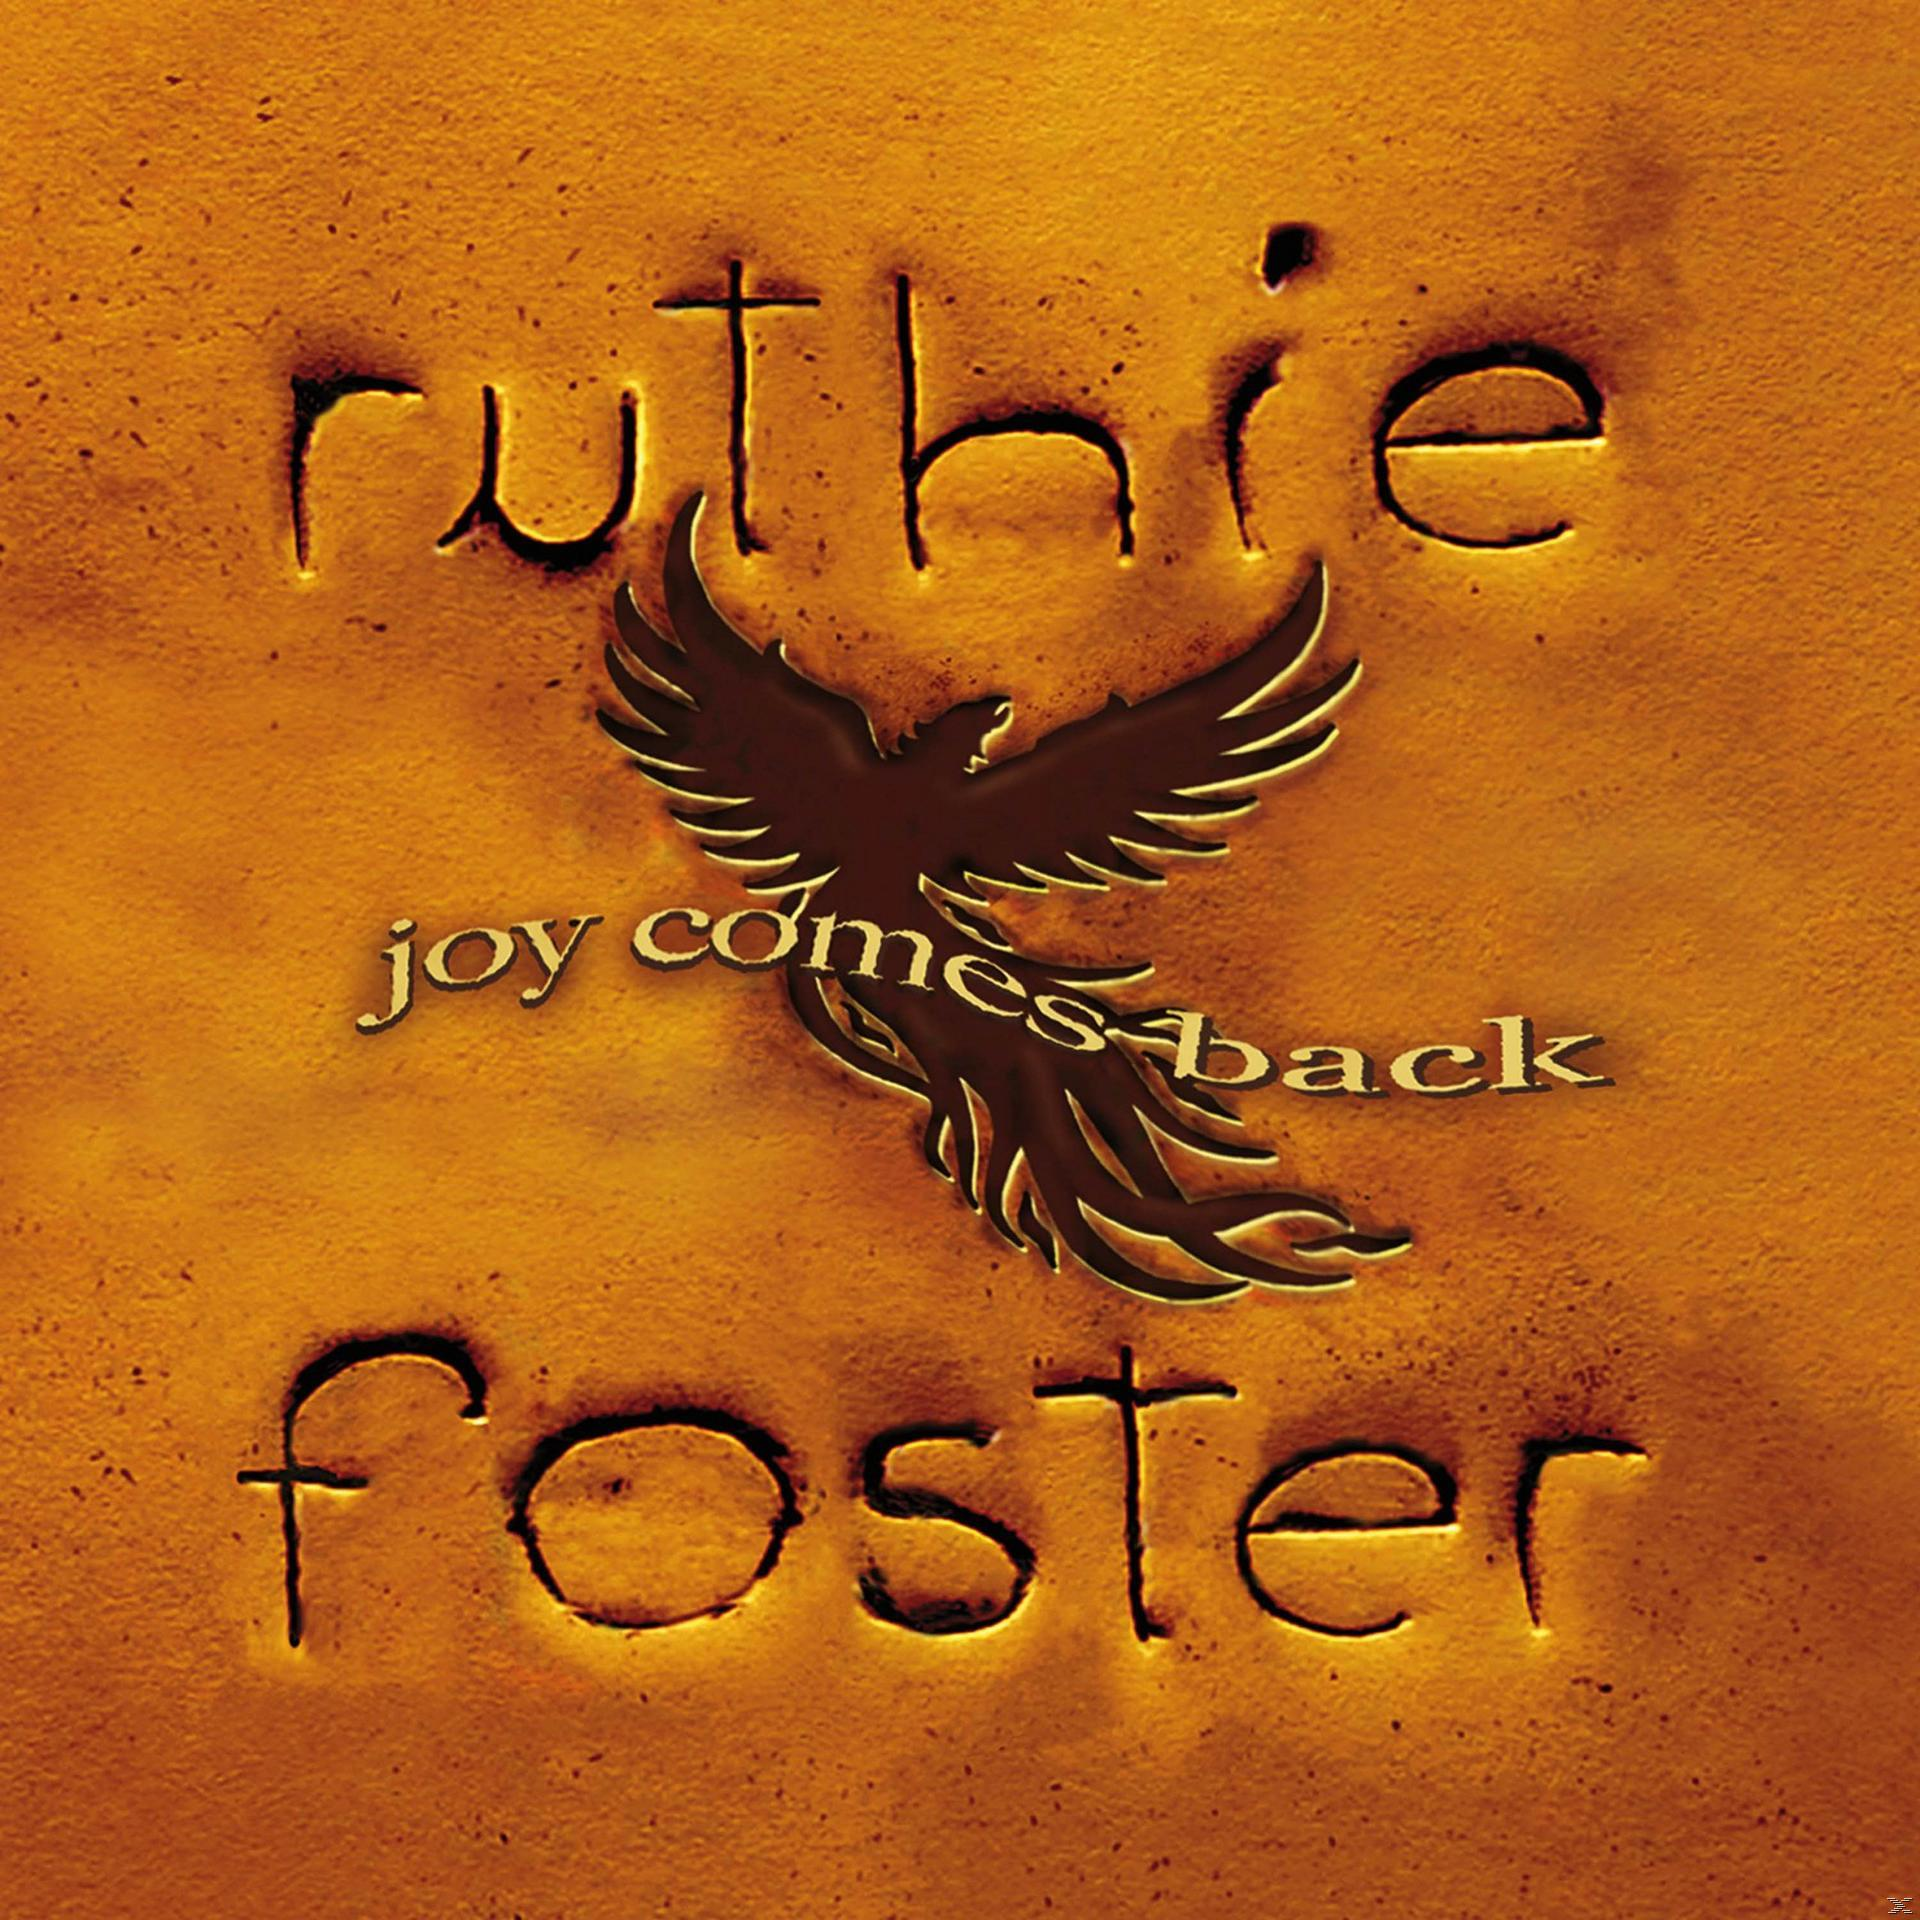 (CD) Foster Joy Ruthie Back - - Comes